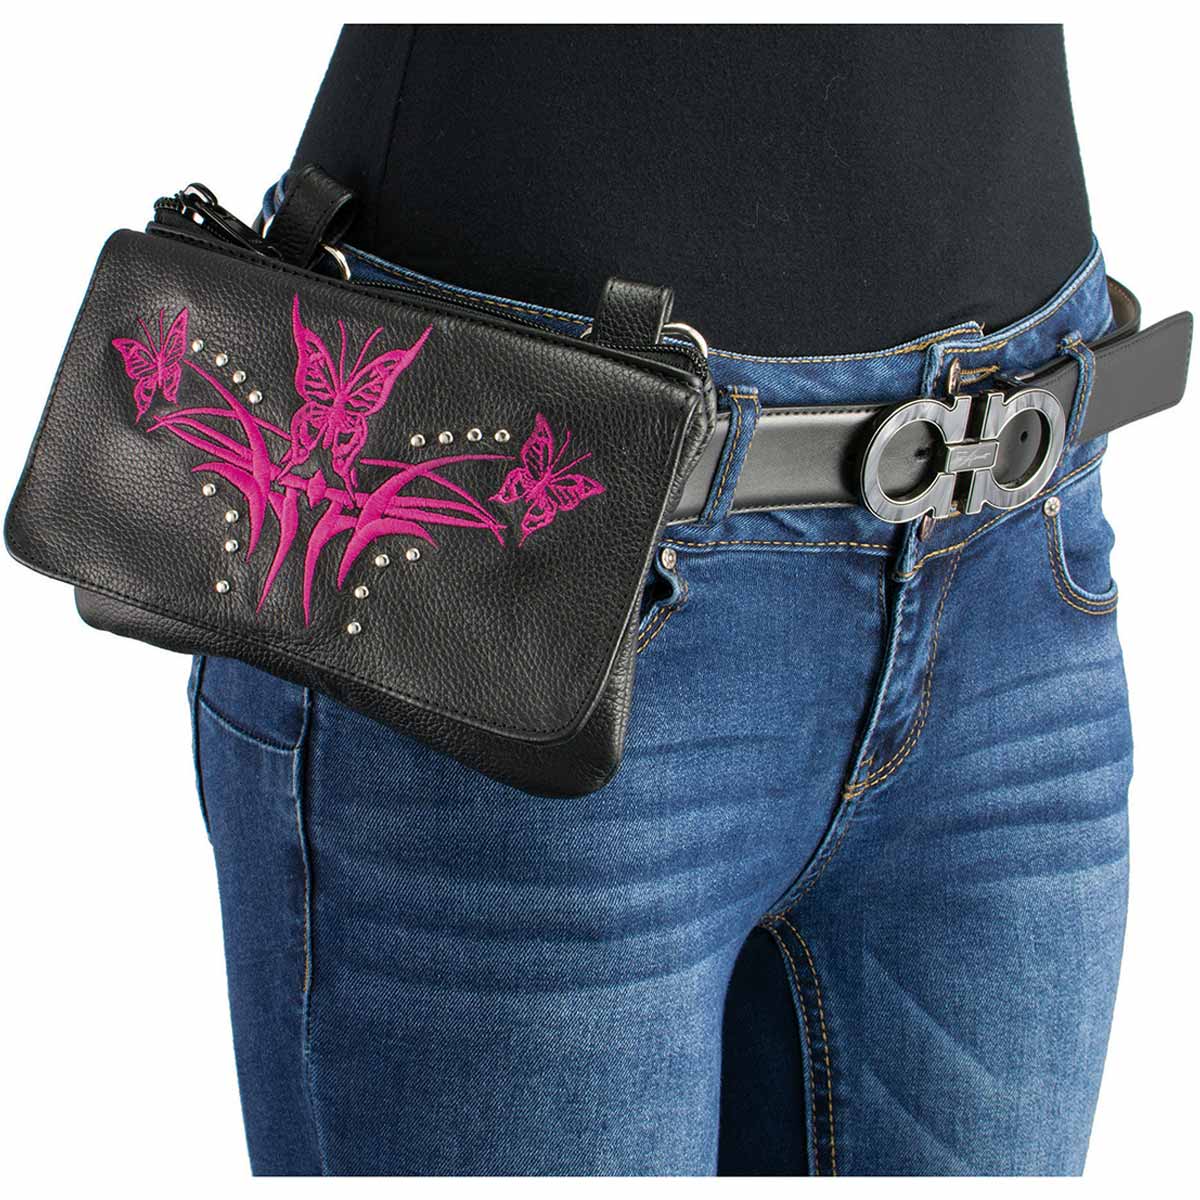 Milwaukee Leather MP8851 Women's Black and Pink Leather Multi Pocket Belt Bag